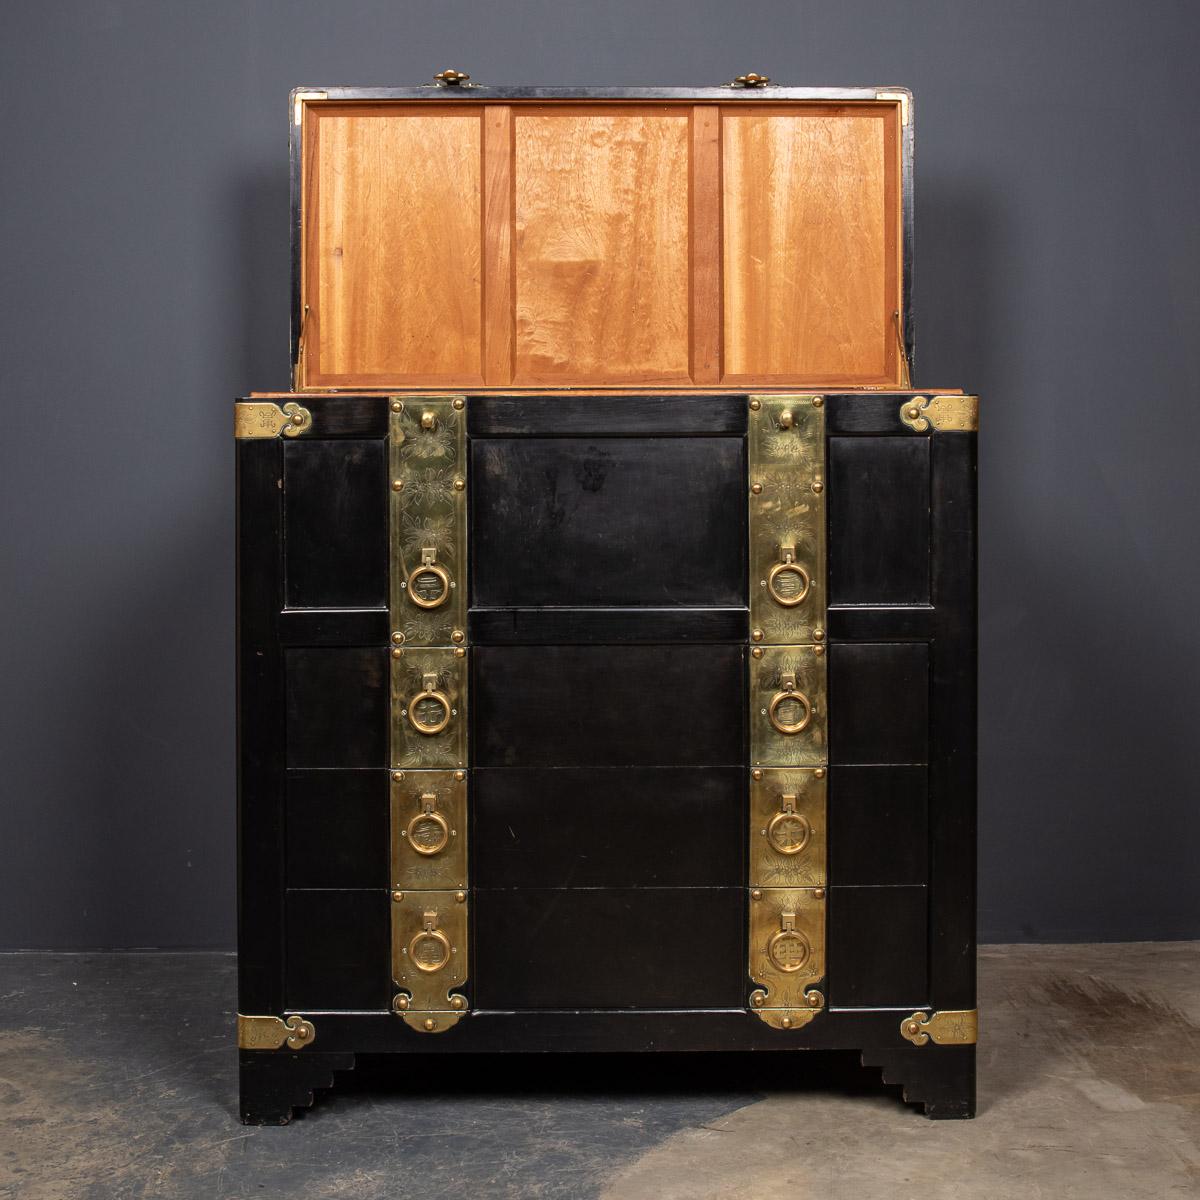 Striking mid-20th century Chinese export black lacquered trunk with engraved brass banding and handles. The top trunk is lined with cedar and the insides of the drawers have been ebonised.

Measures: Width 107cm
Height 101cm
Depth 50cm.